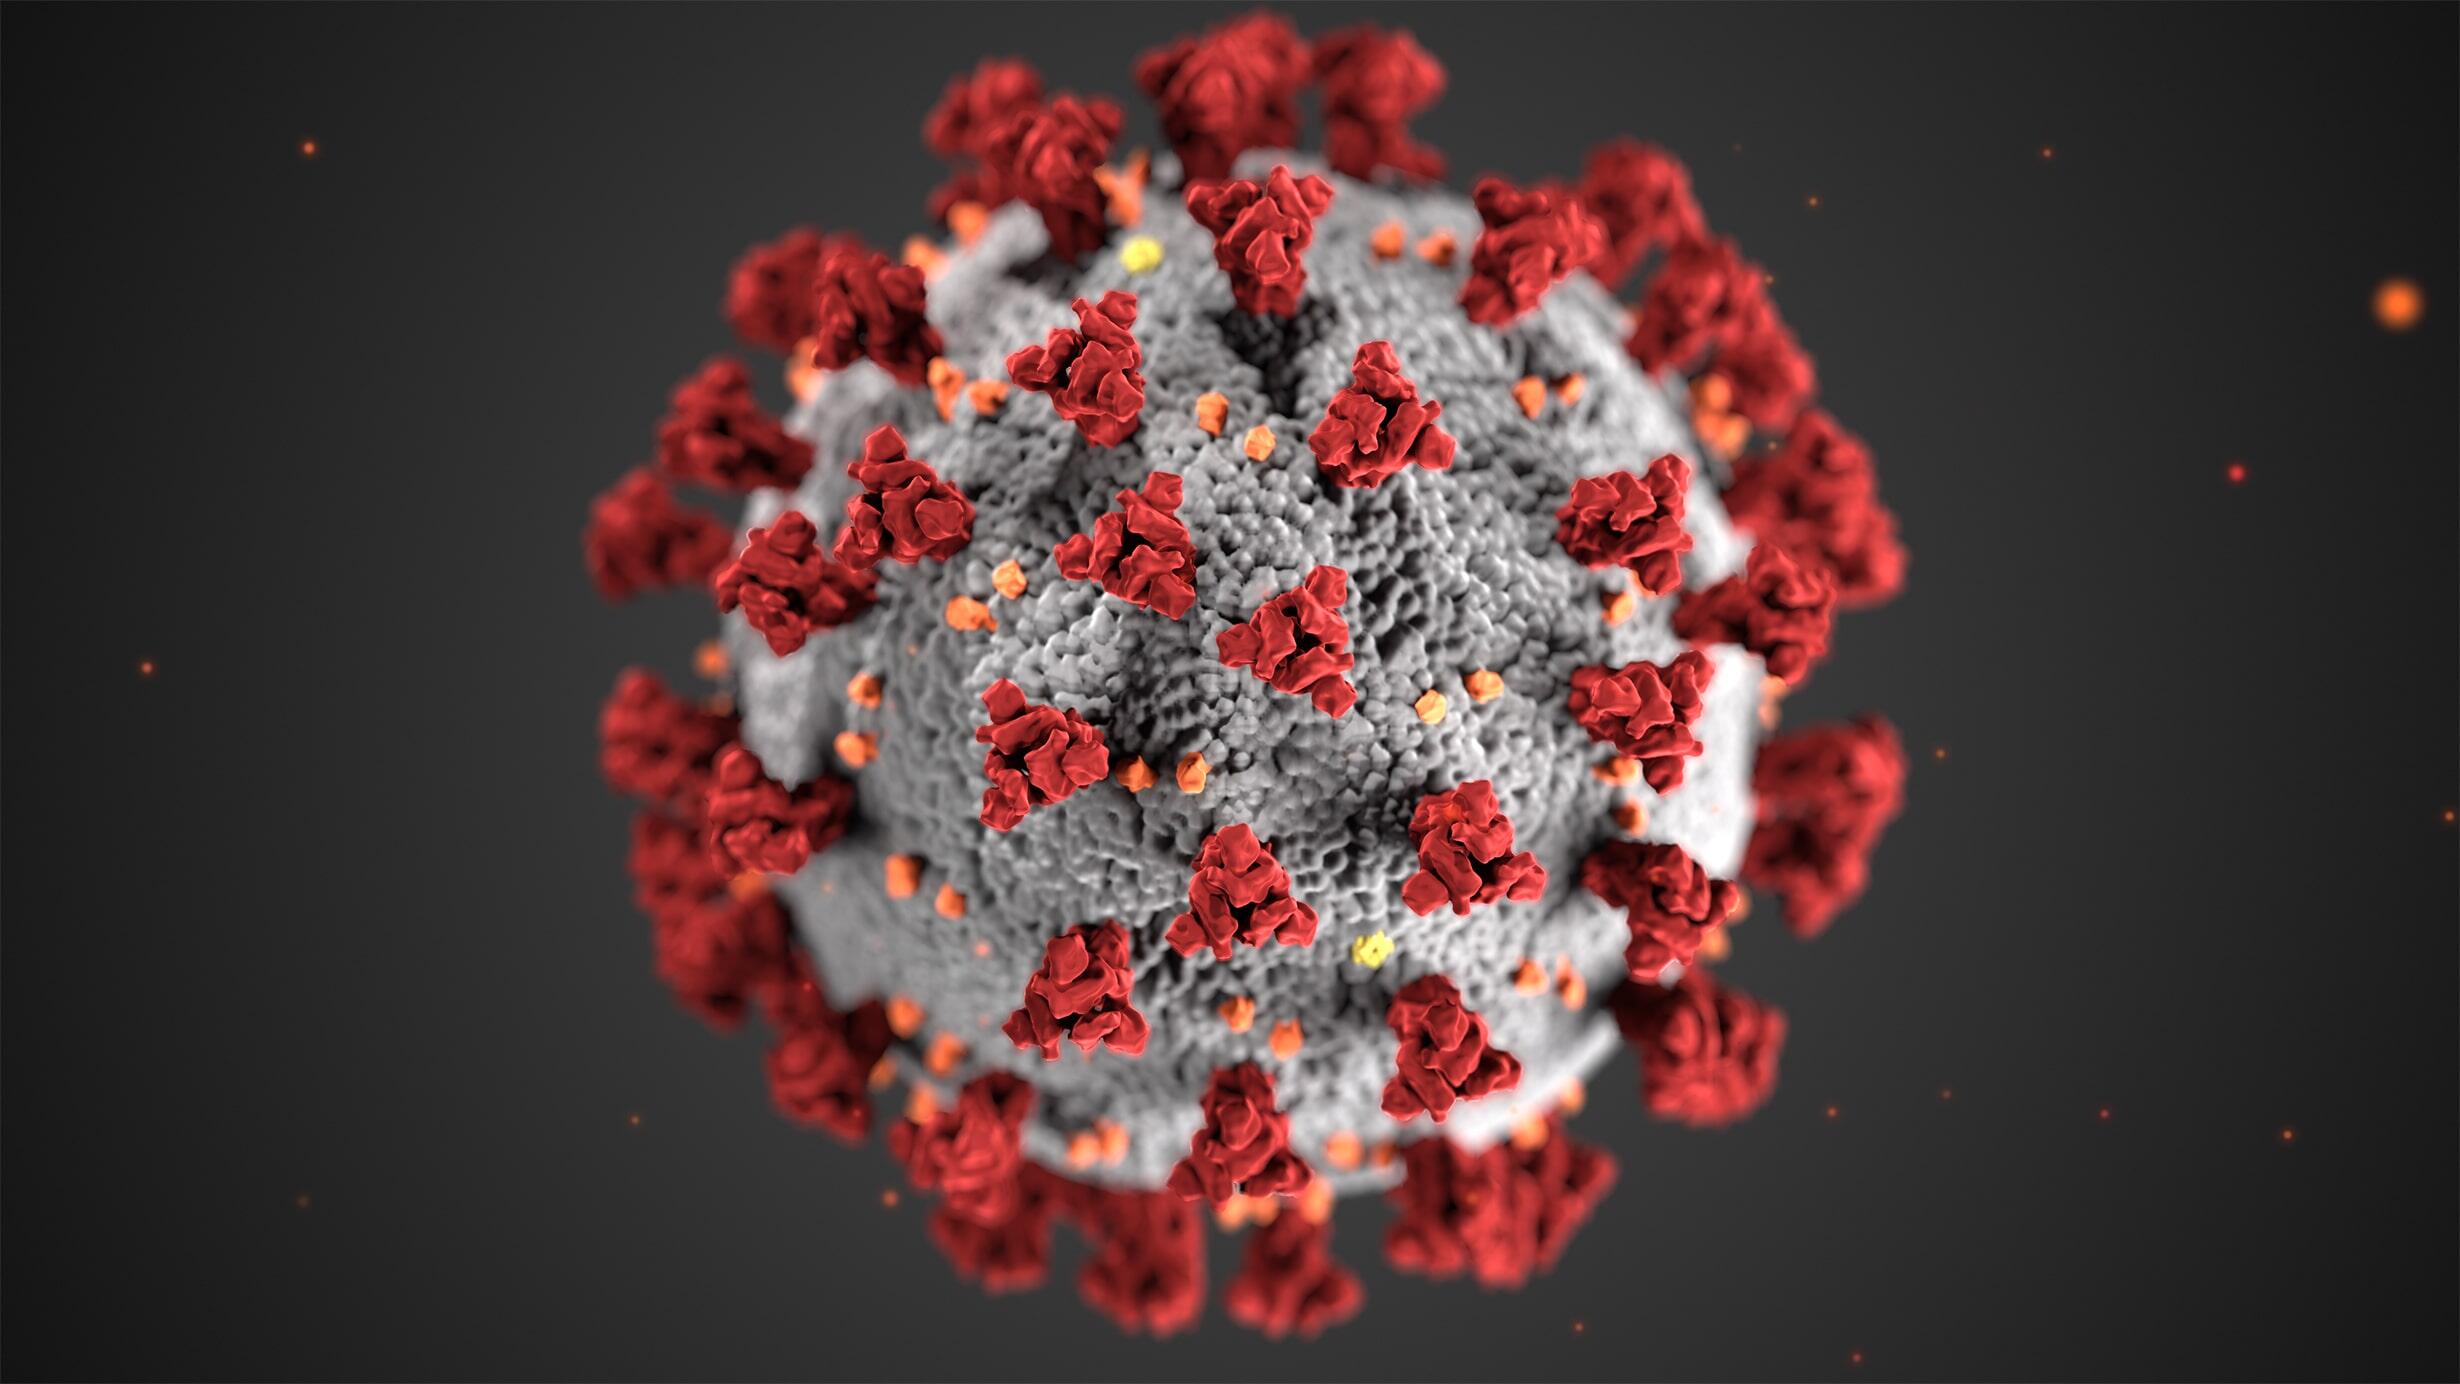 An illustration of the coronavirus, demonstrating the spikes - the coronas - that adorn the outer surface of the virus.